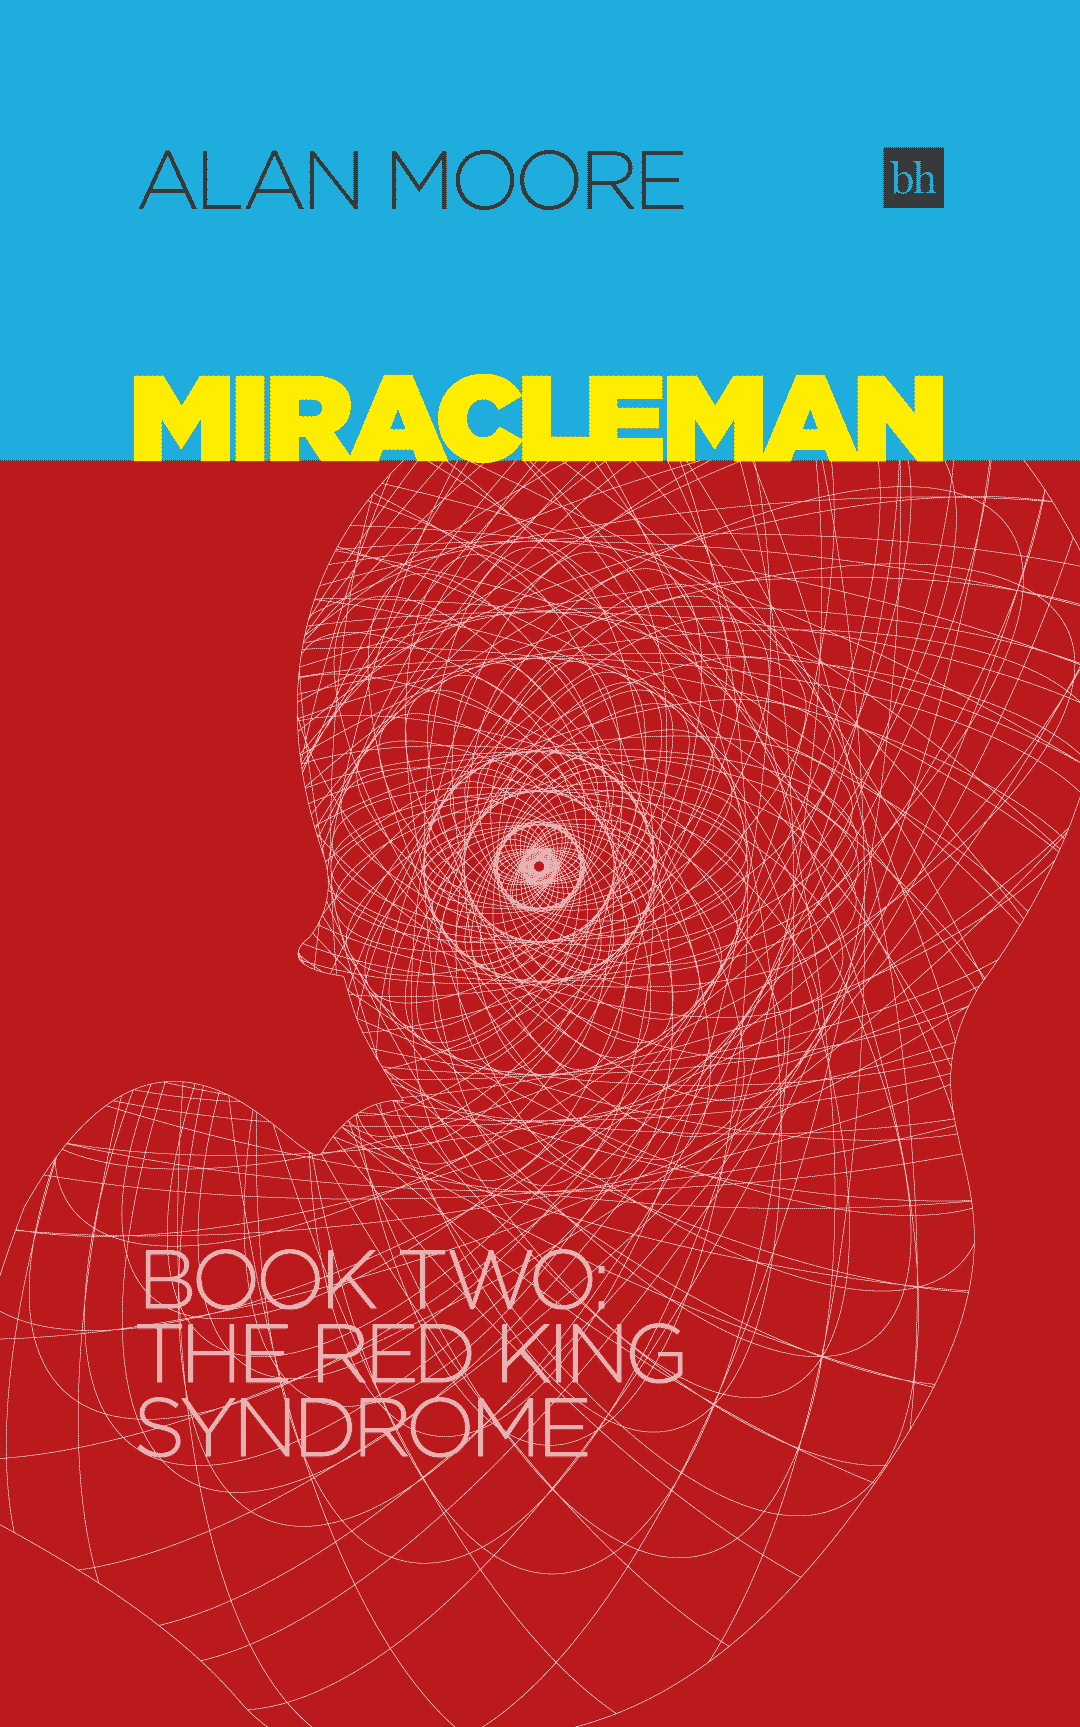 Miracleman Book Two: The Red King Syndrome by Alan Moore